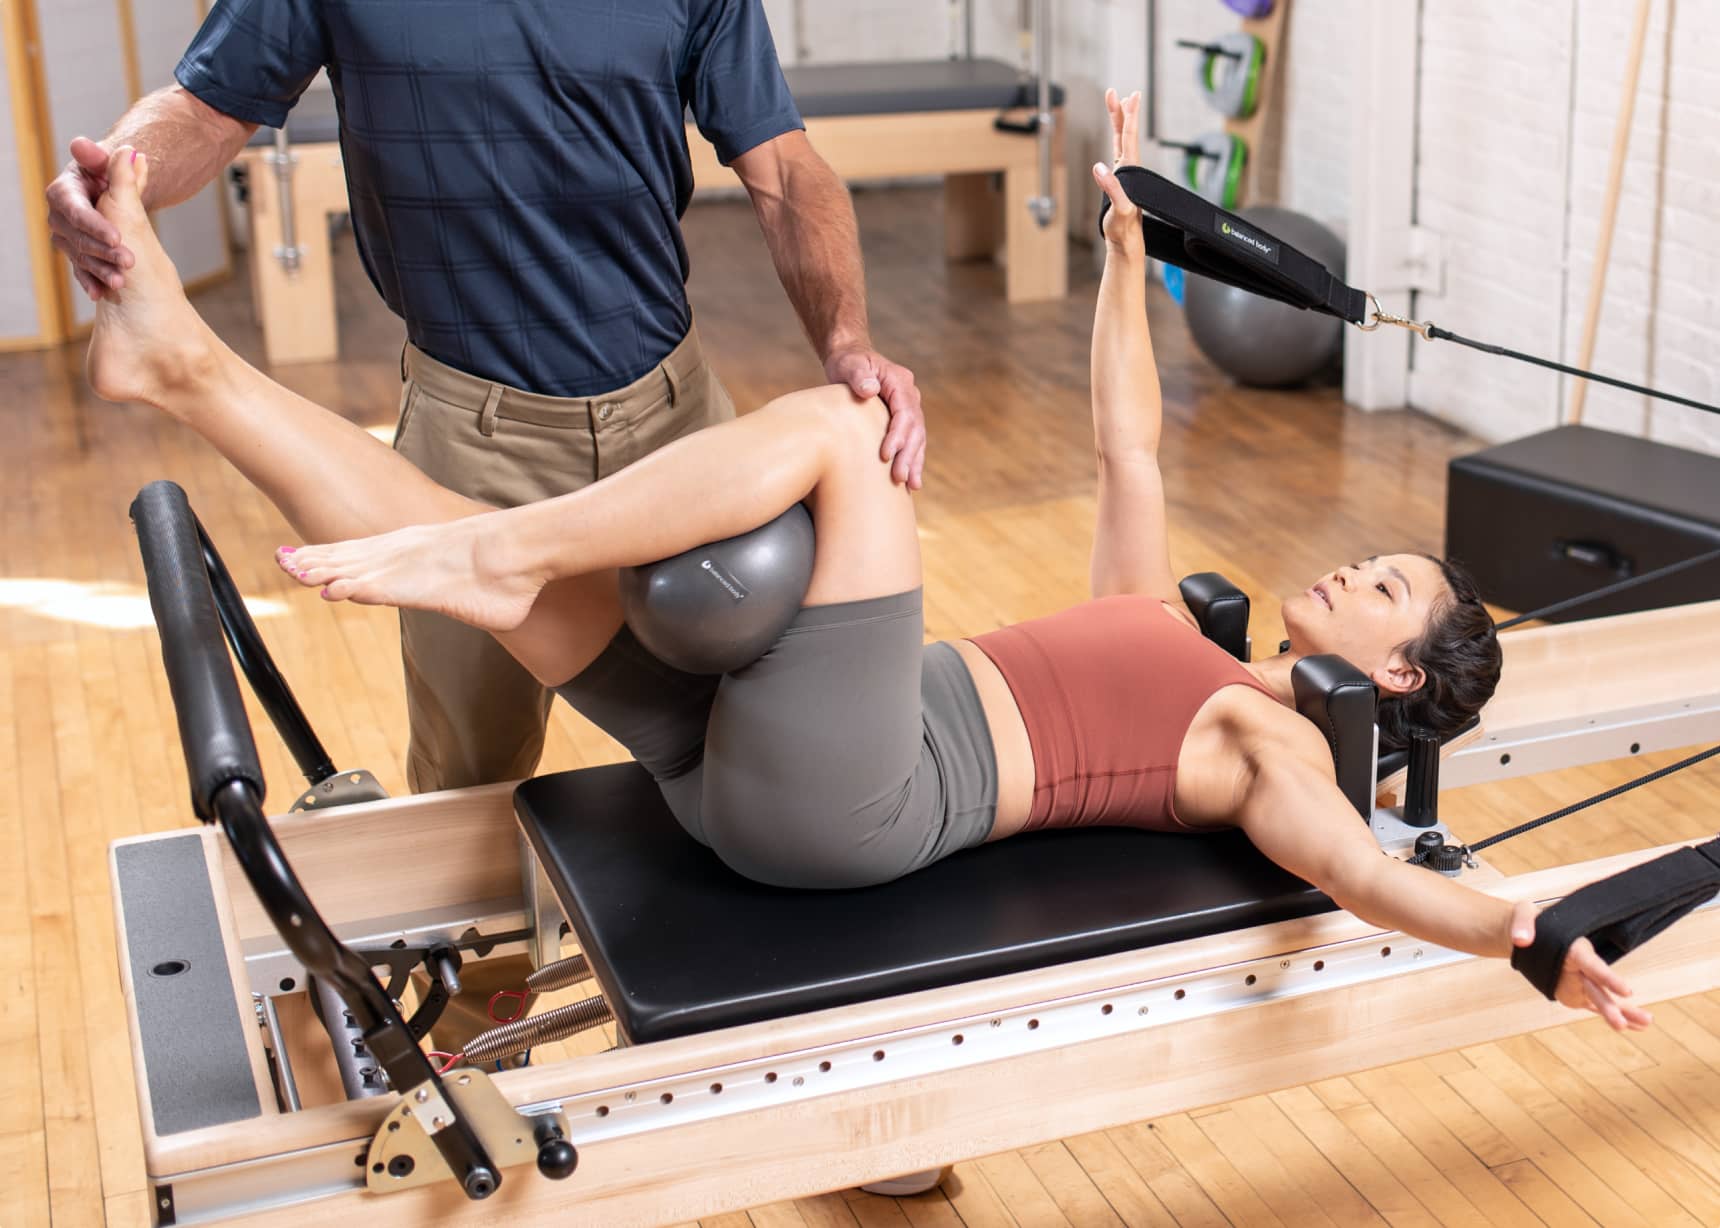 A physical therapist reaches down to adjust the knee position of a client laying on a pilates reformer